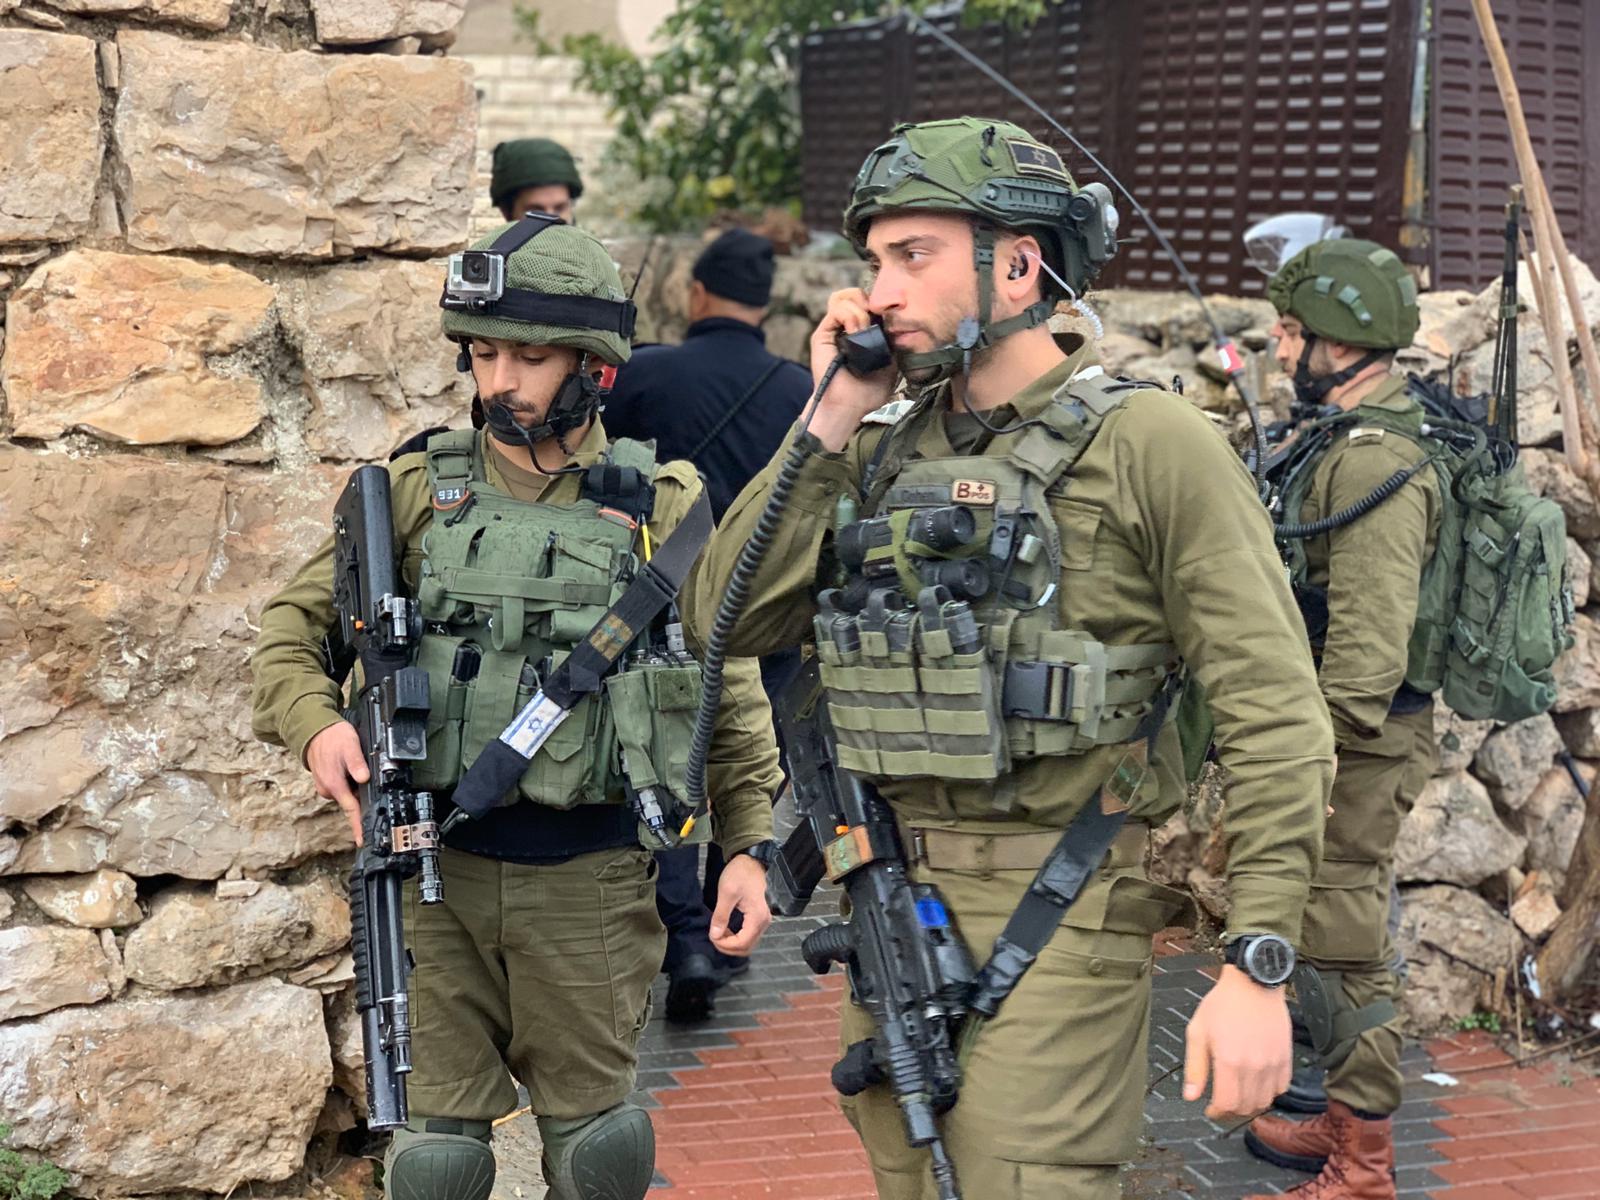 2 Palestinians try to stab soldiers, are shot — IDF The Times of Israel